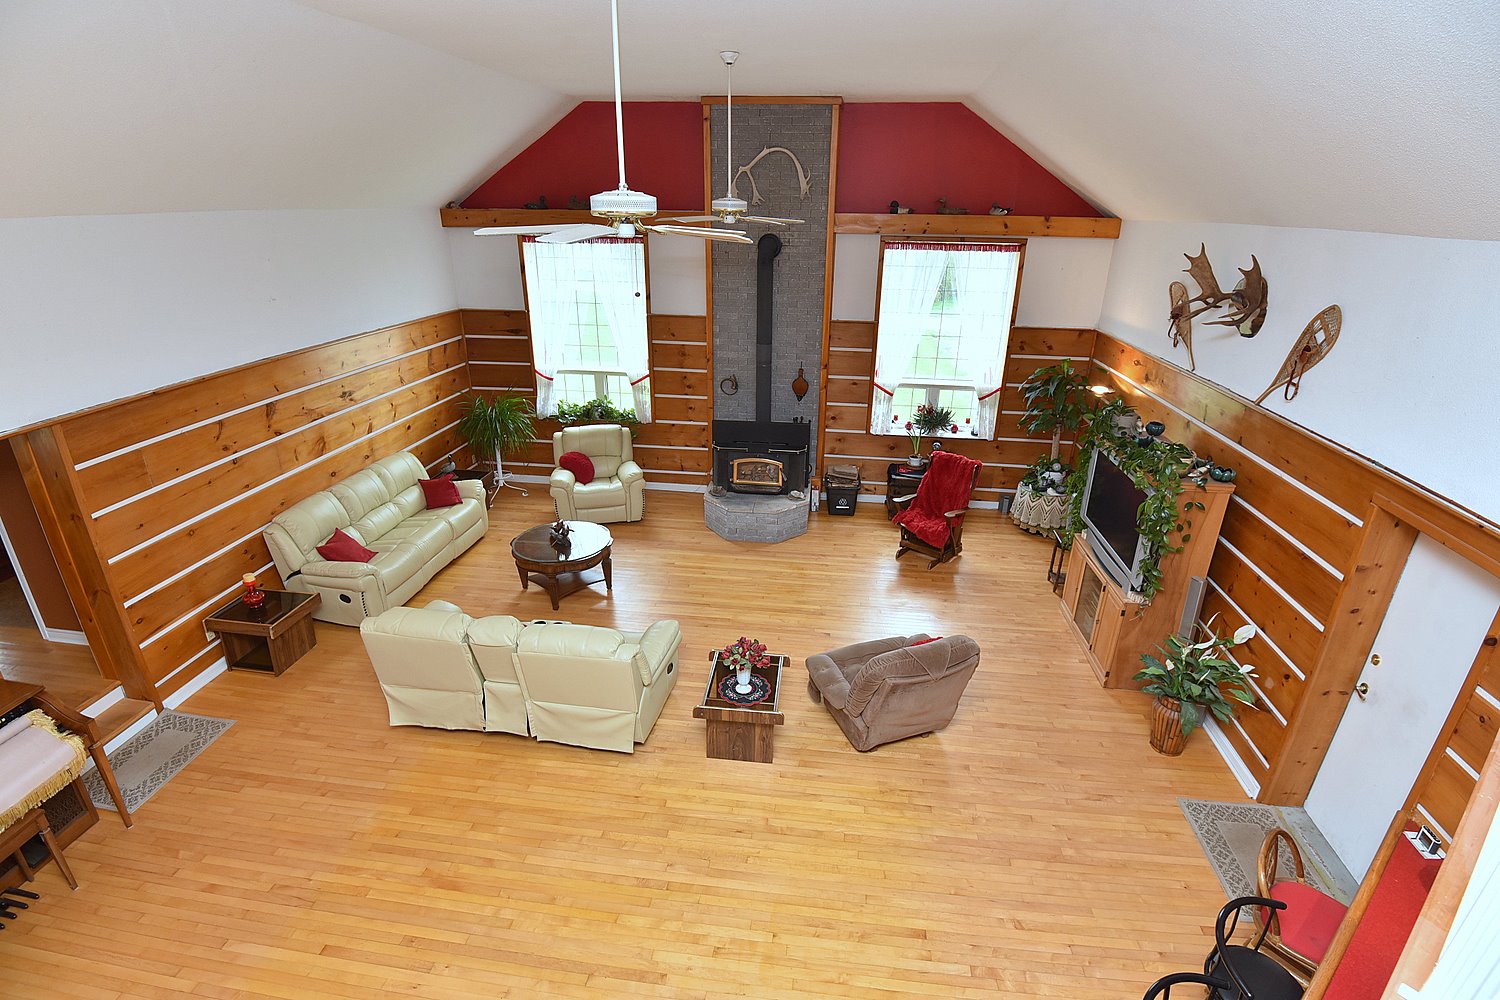 Living Room Overview